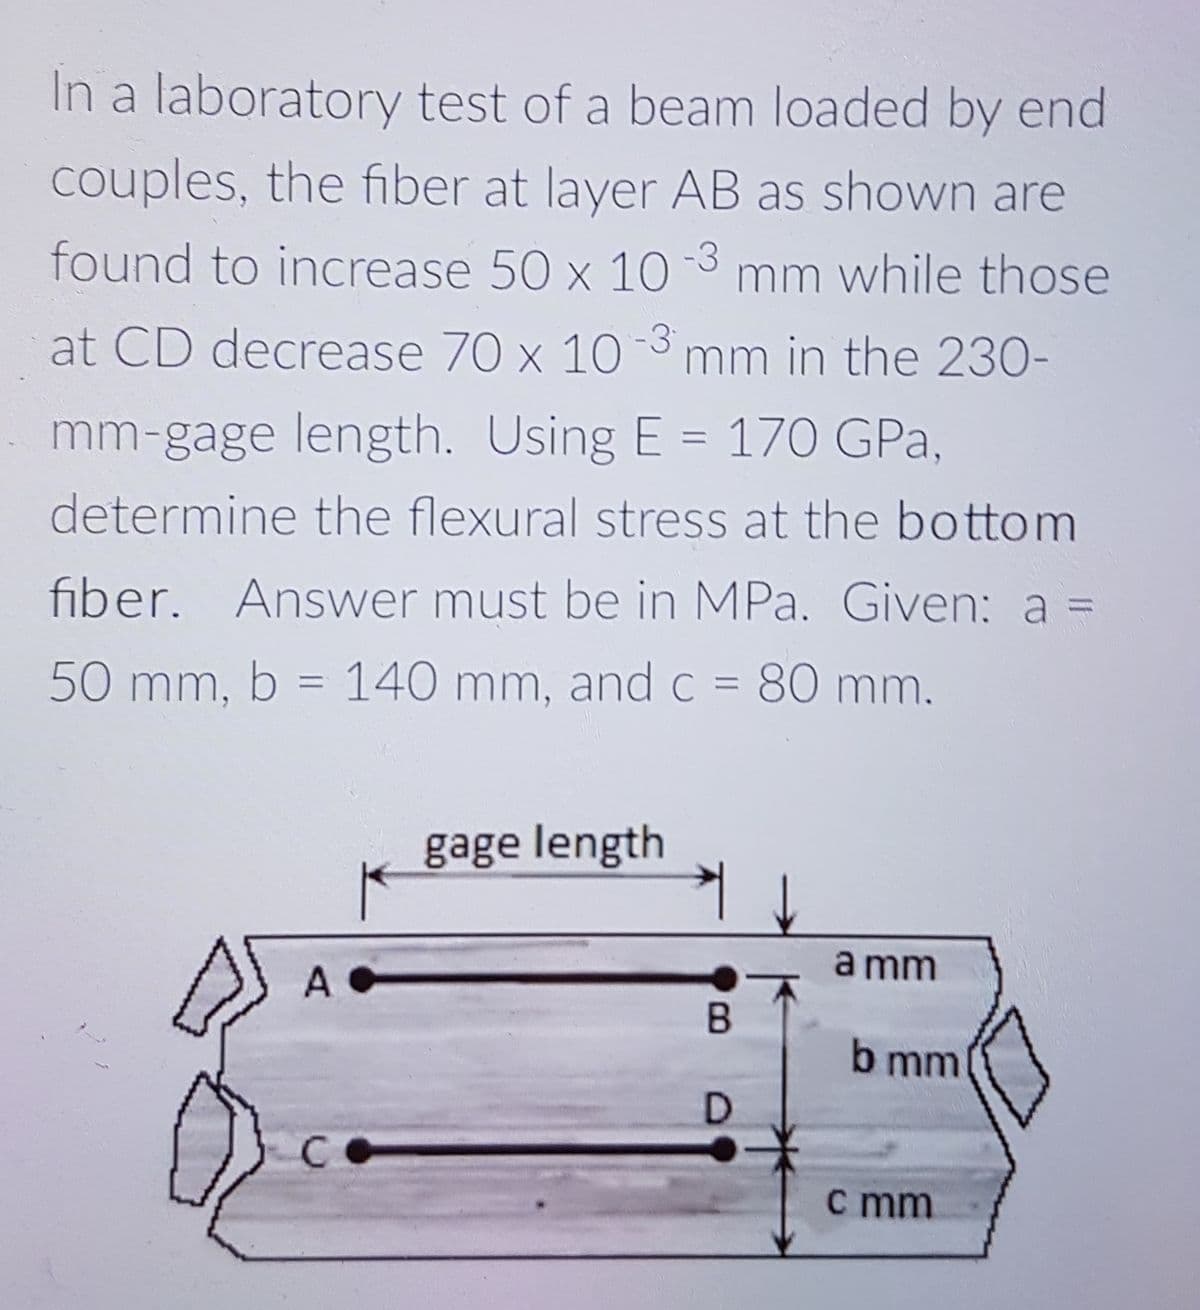 In a laboratory test of a beam loaded by end
couples, the fiber at layer AB as shown are
found to increase 50 x 10 3 mm while those
at CD decrease 70 x 103 mm in the 230-
mm-gage length. Using E = 170 GPa,
determine the flexural stress at the bottom
fiber. Answer must be in MPa. Given: a =
50 mm, b = 140 mm, and C = 80 mm.
%3D
gage length
a mm
b mm
c mm
B.
